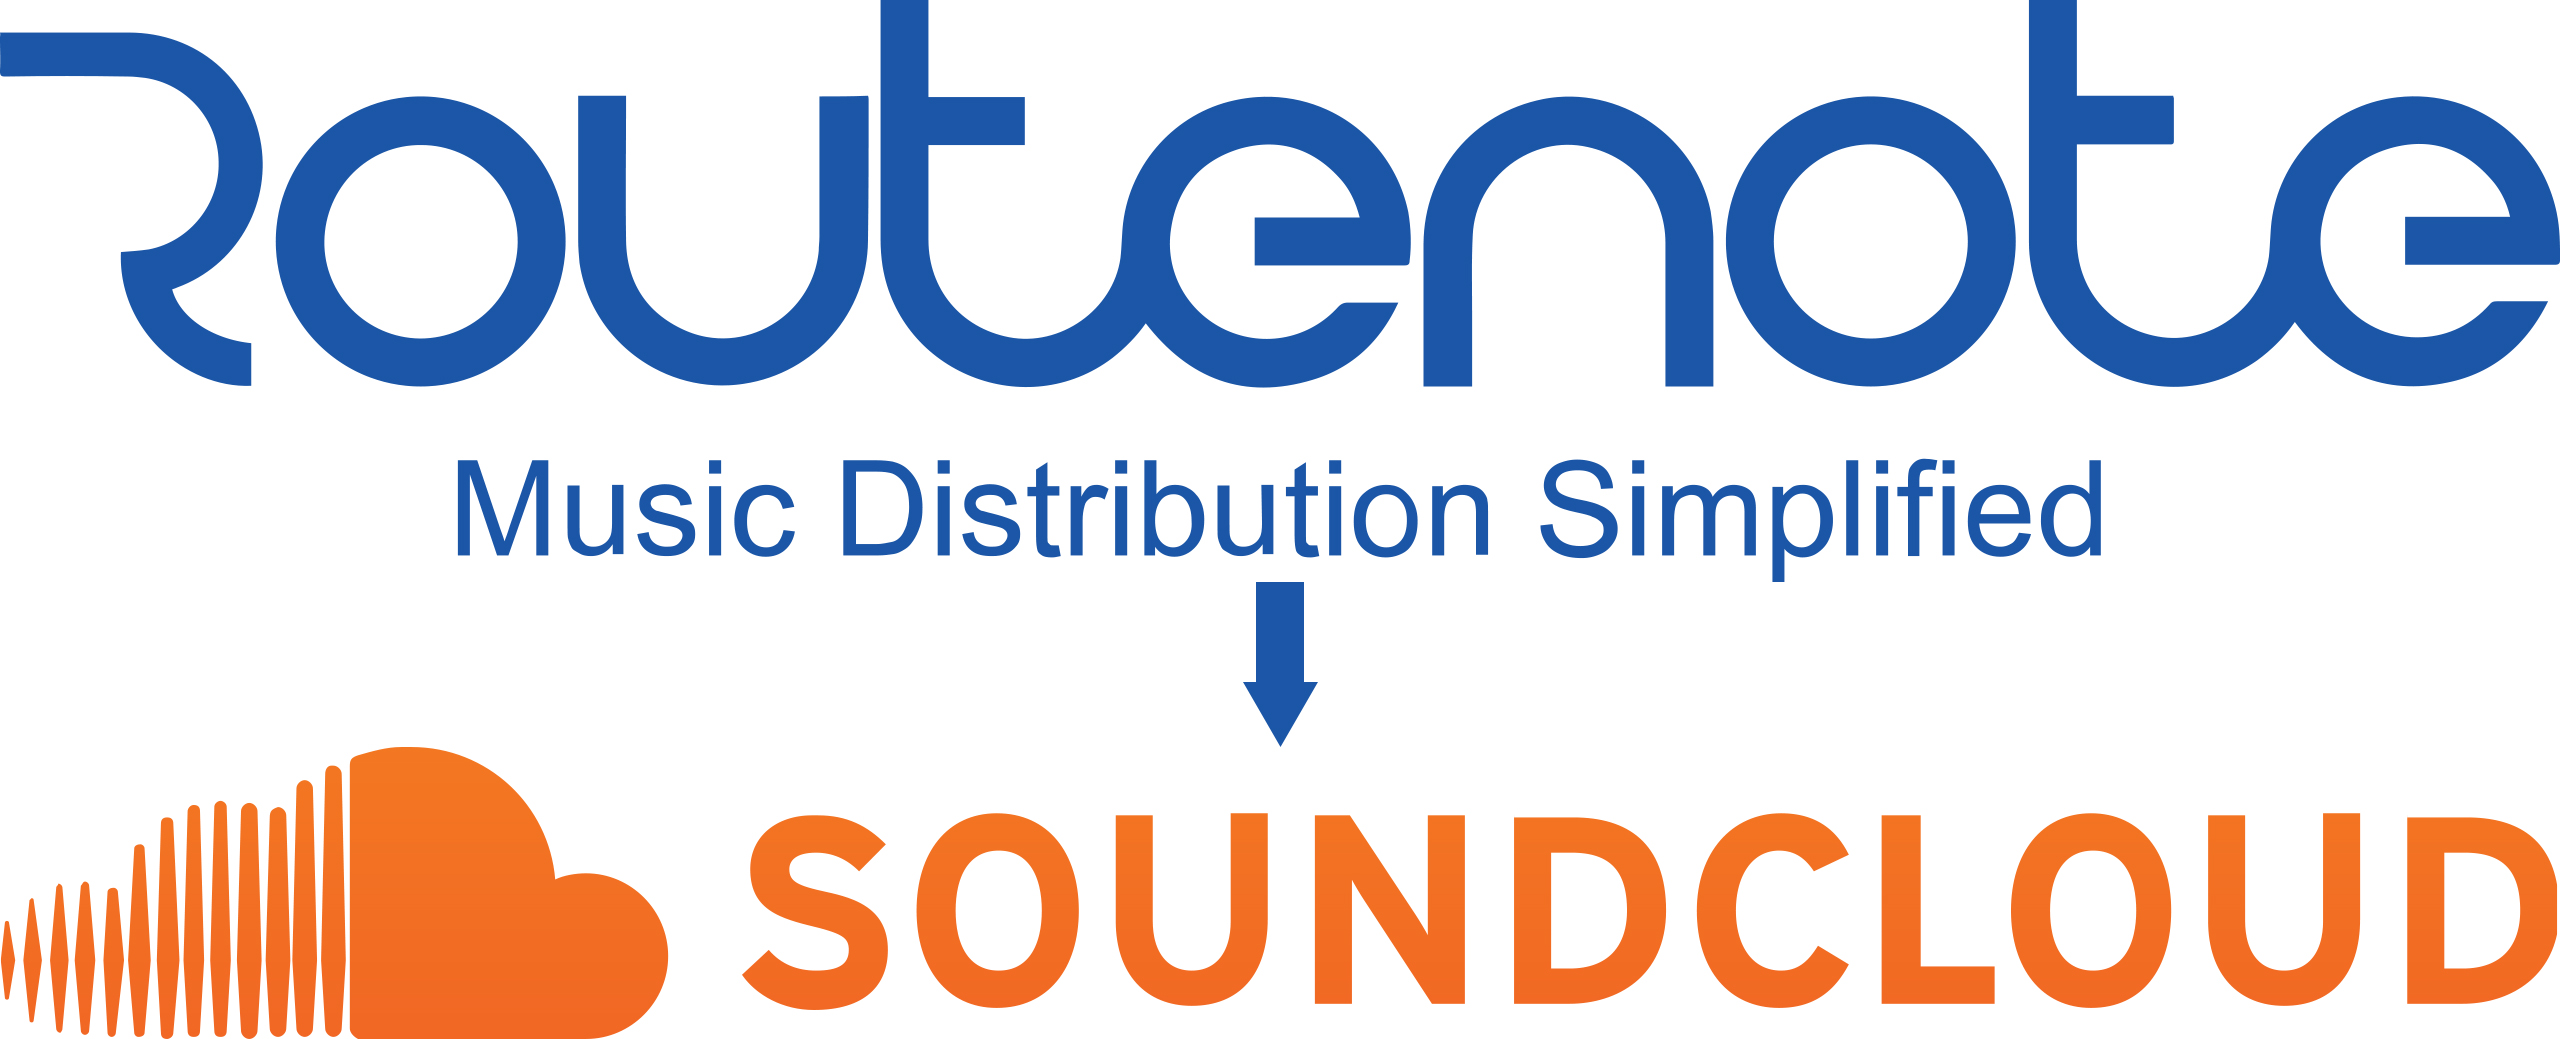 Why does TuneCore not distribute to SoundCloud?